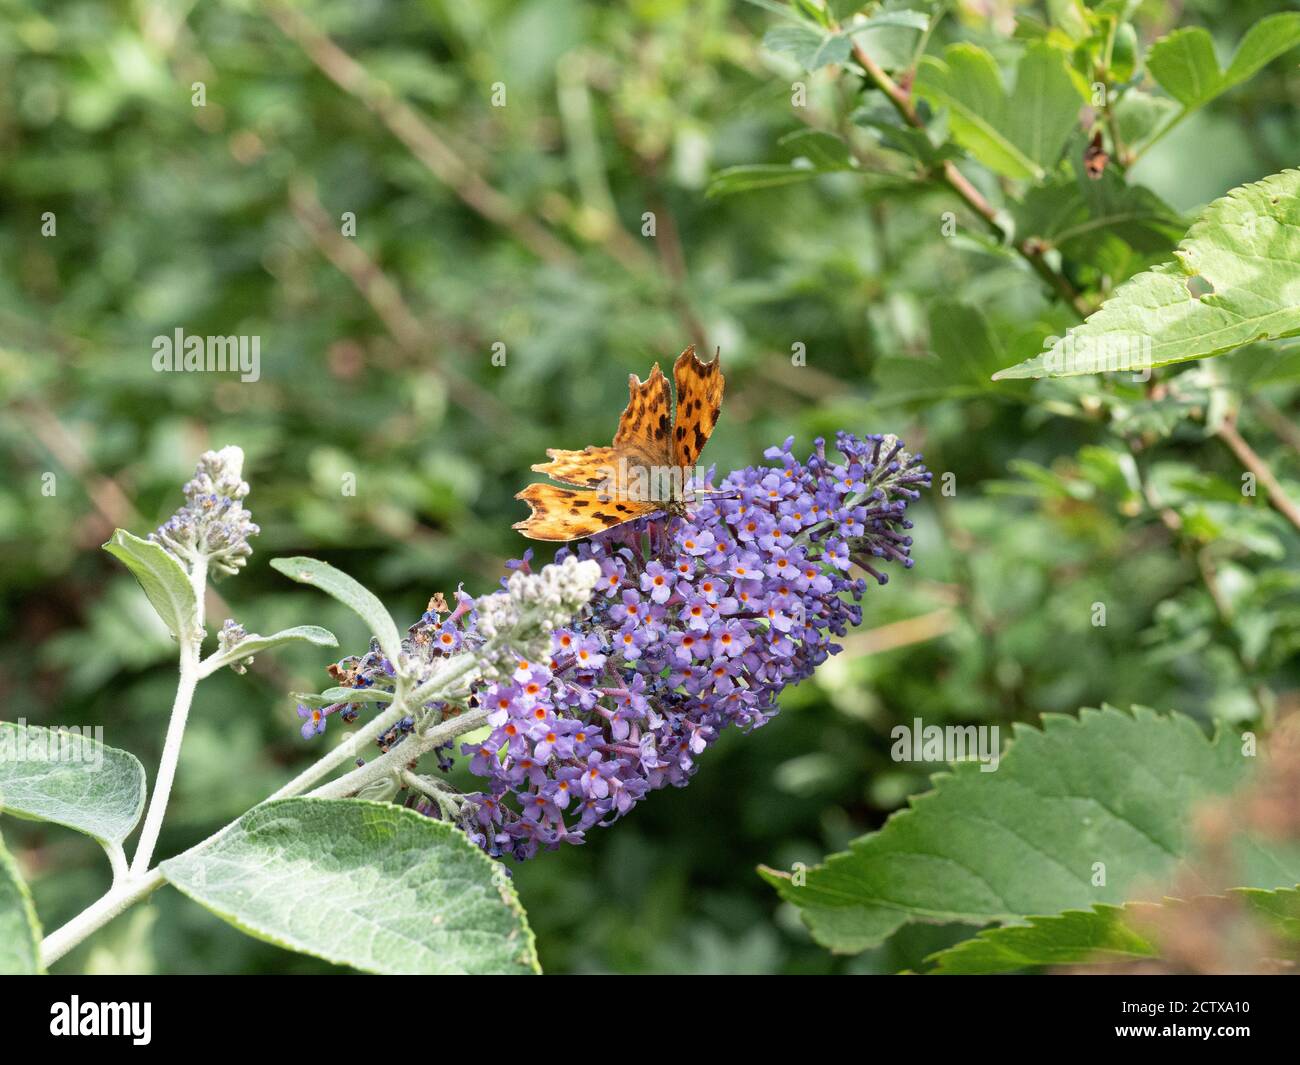 A comma butterfly (Polygonia c-album) resting with open wings on a Buddleia flower Stock Photo